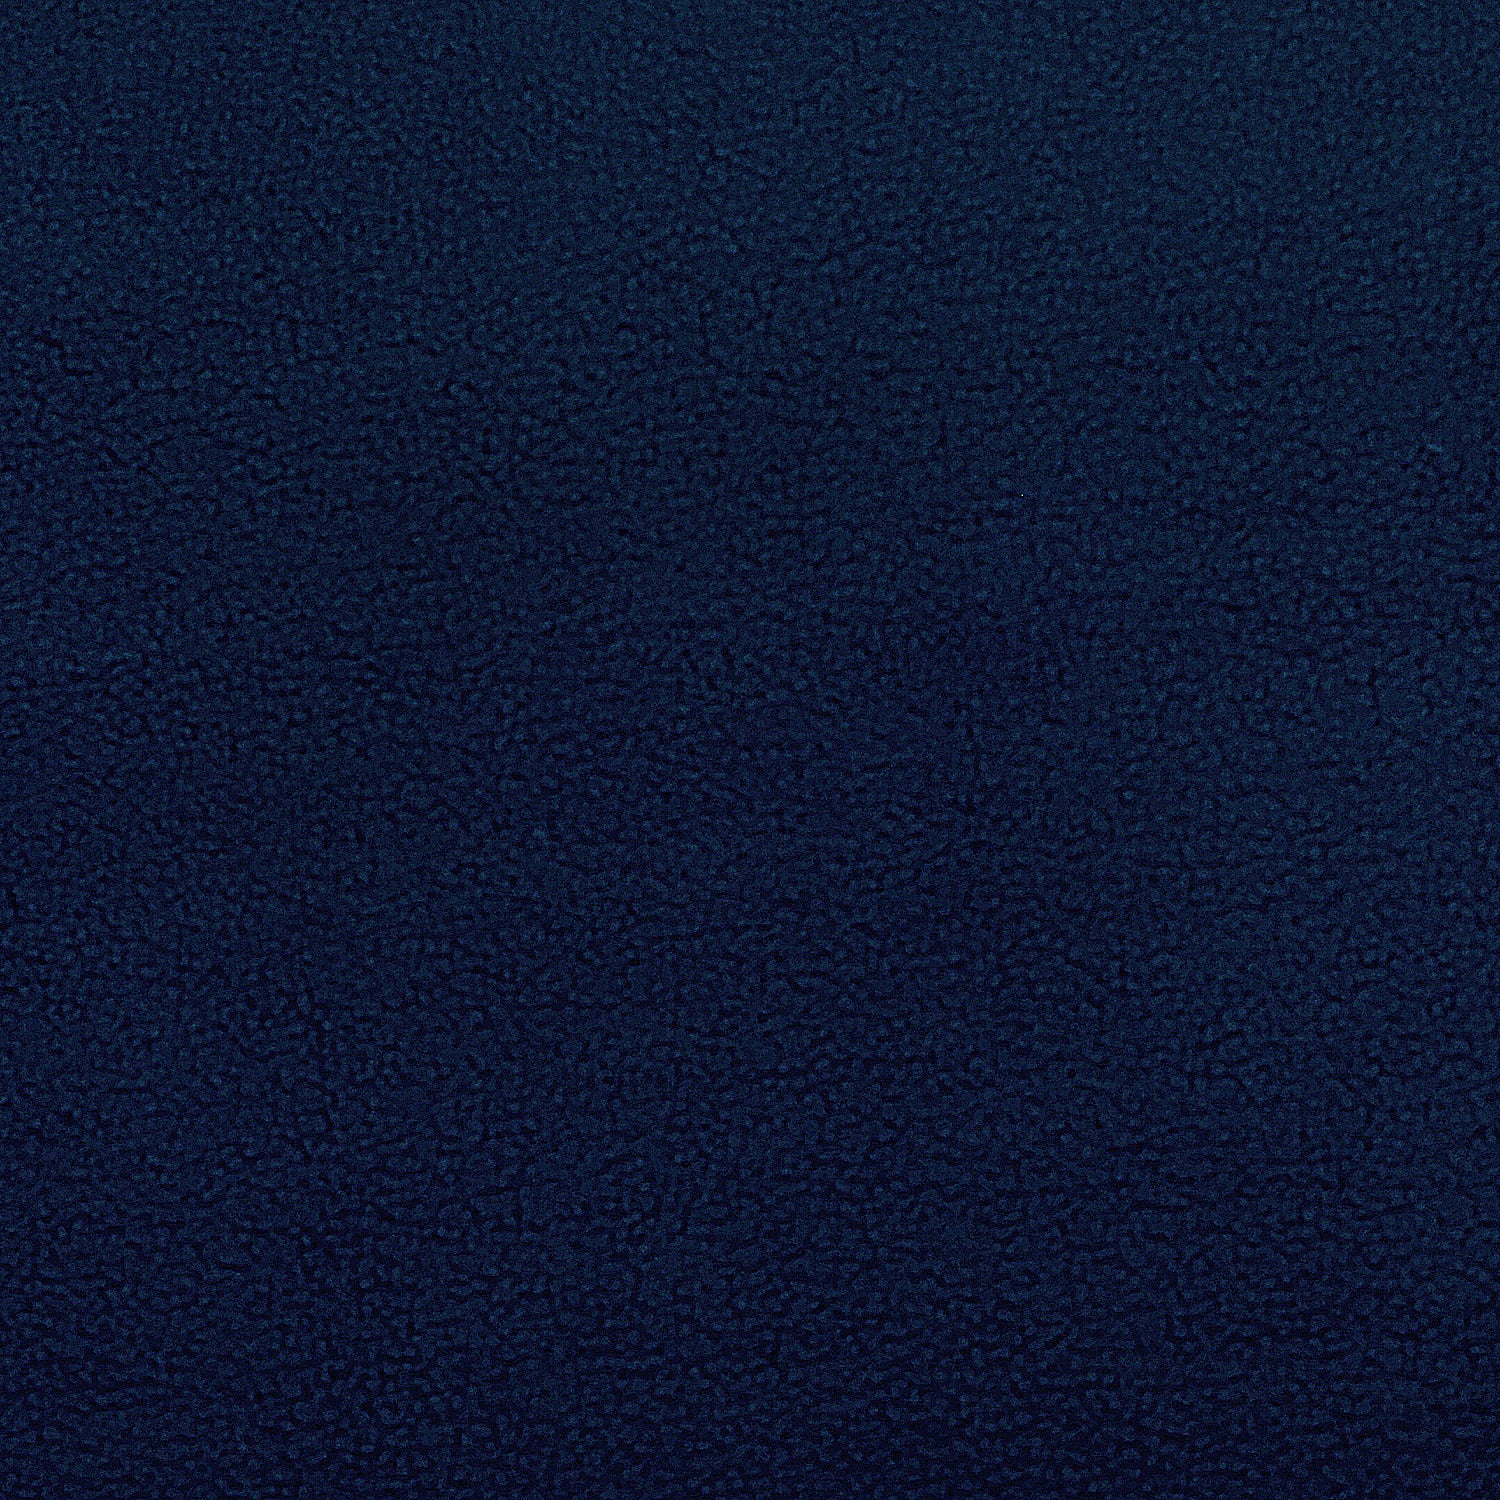 Plain Navy Blue Water-Resistant Bed Protector - 3 Sizes